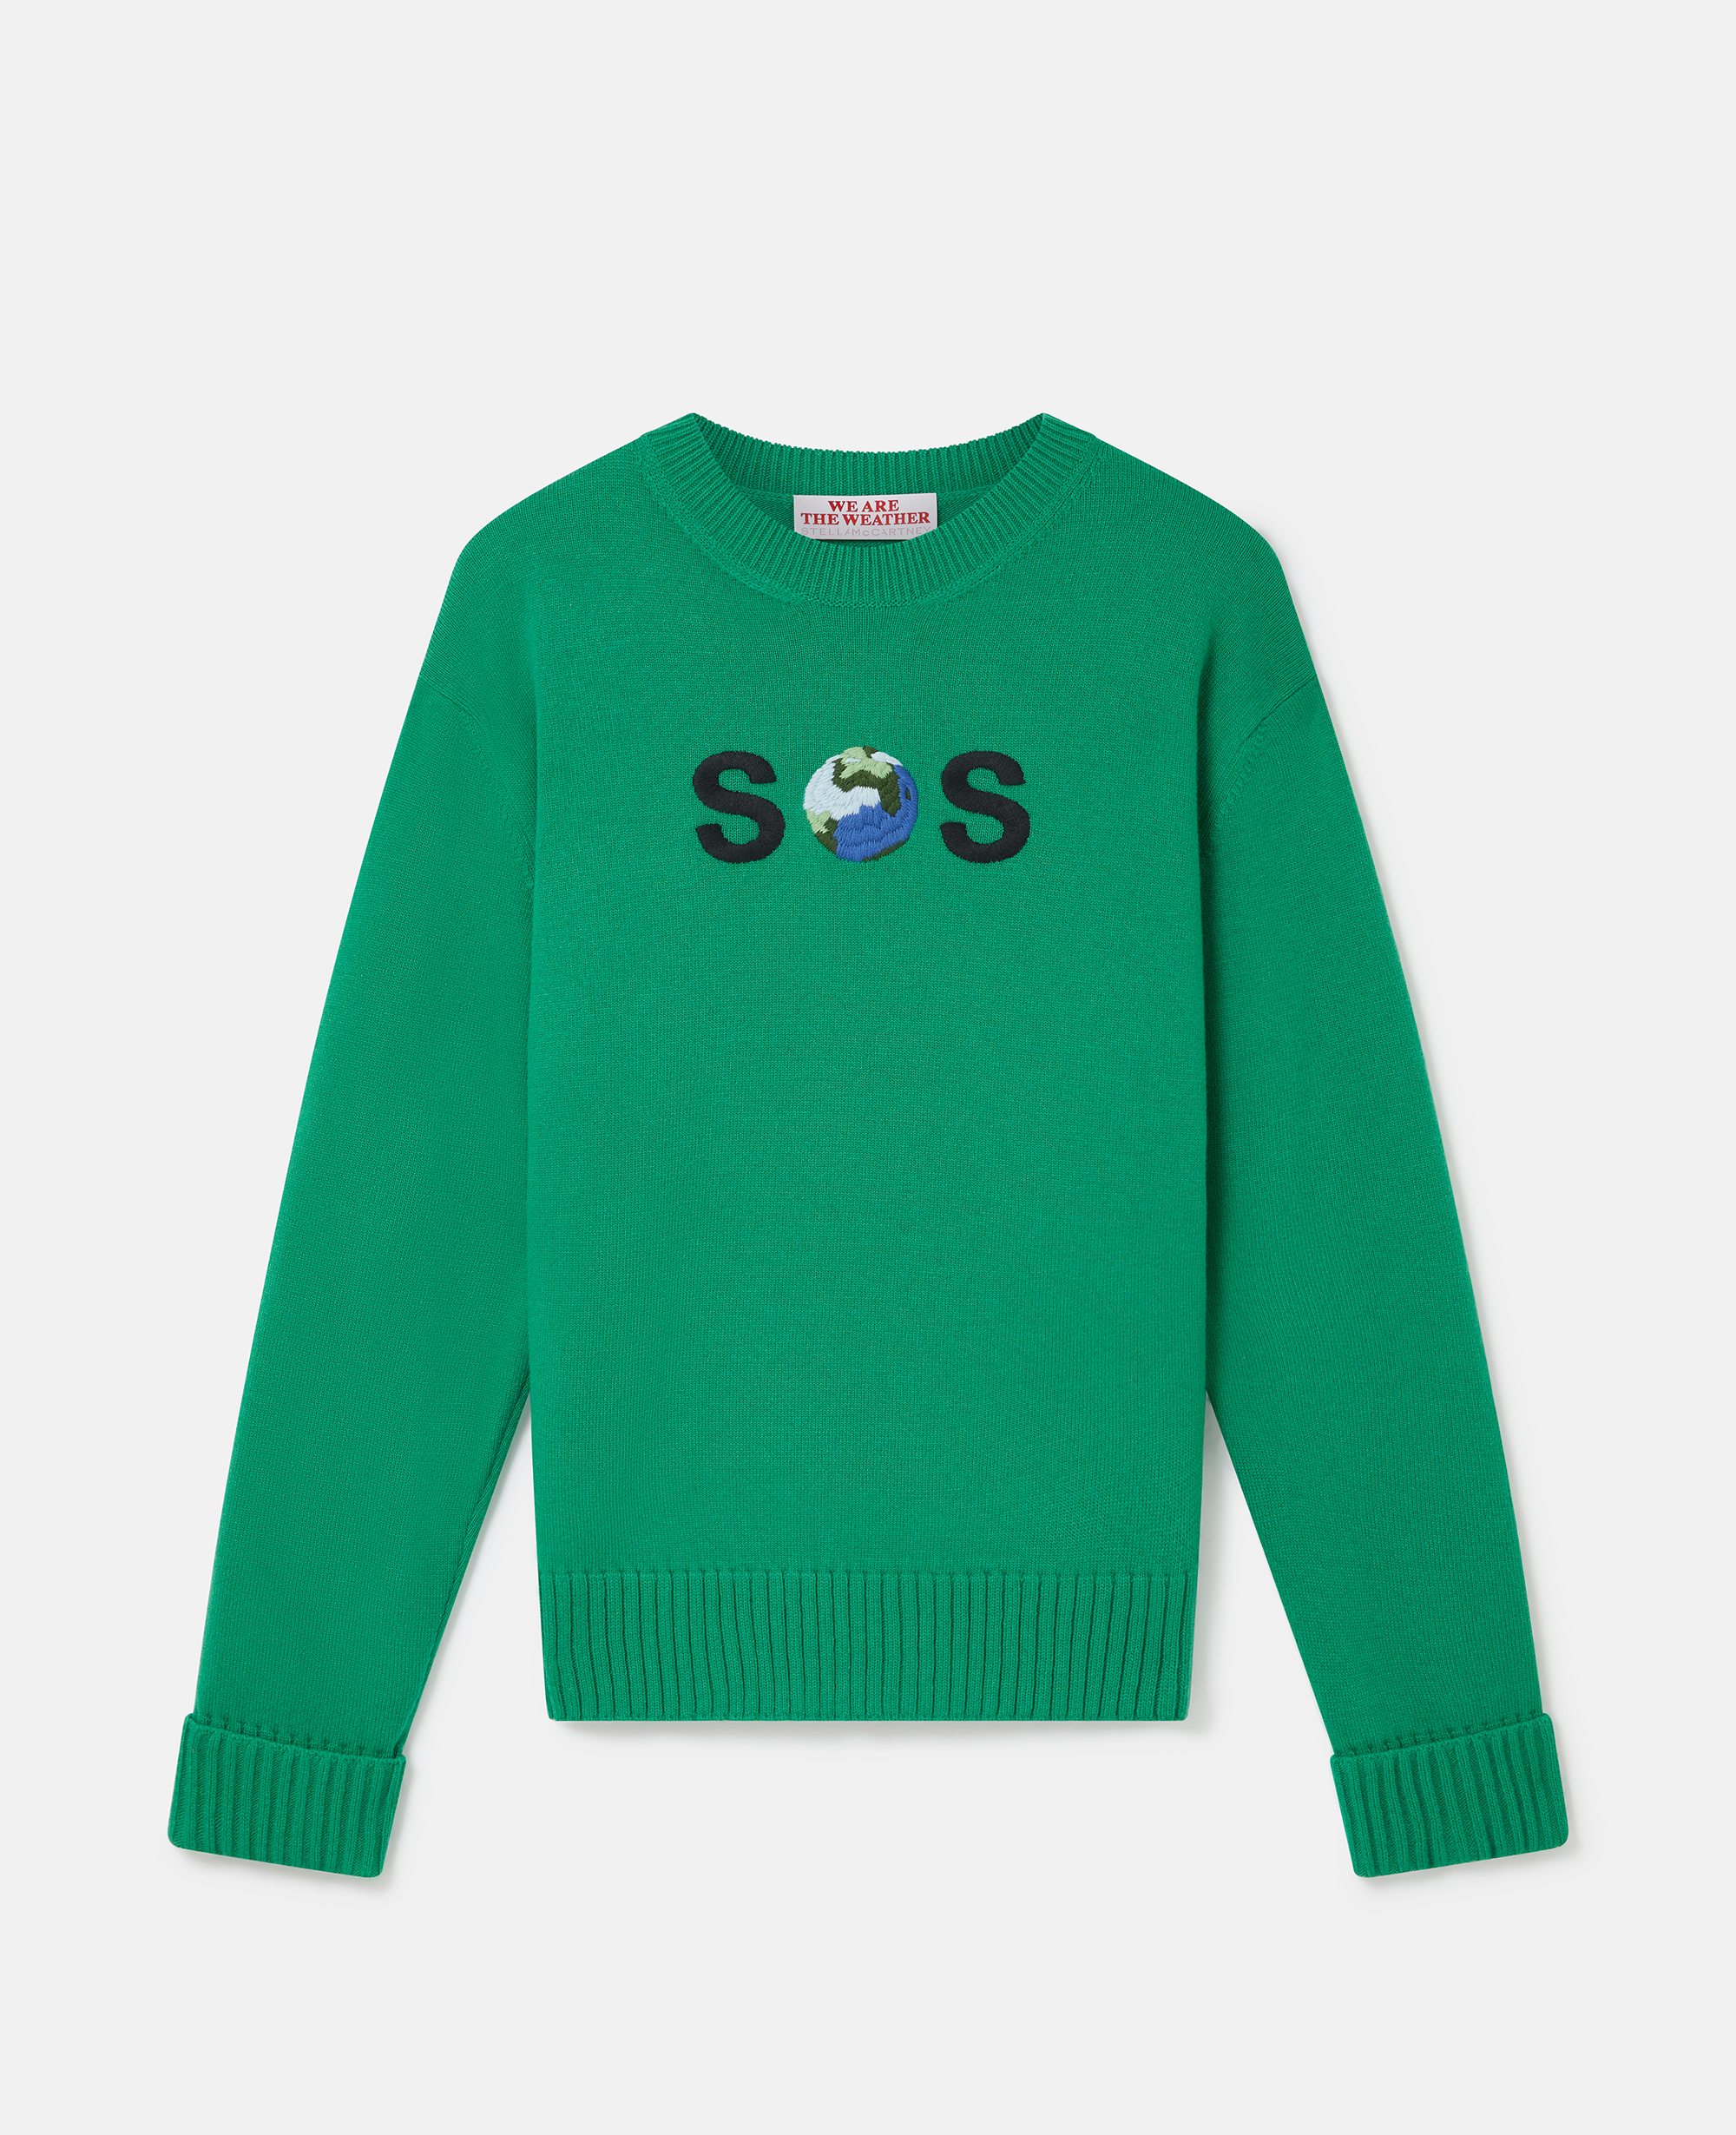 Stella Mccartney Sos Embroidered Knit Jumper In Amazon Green